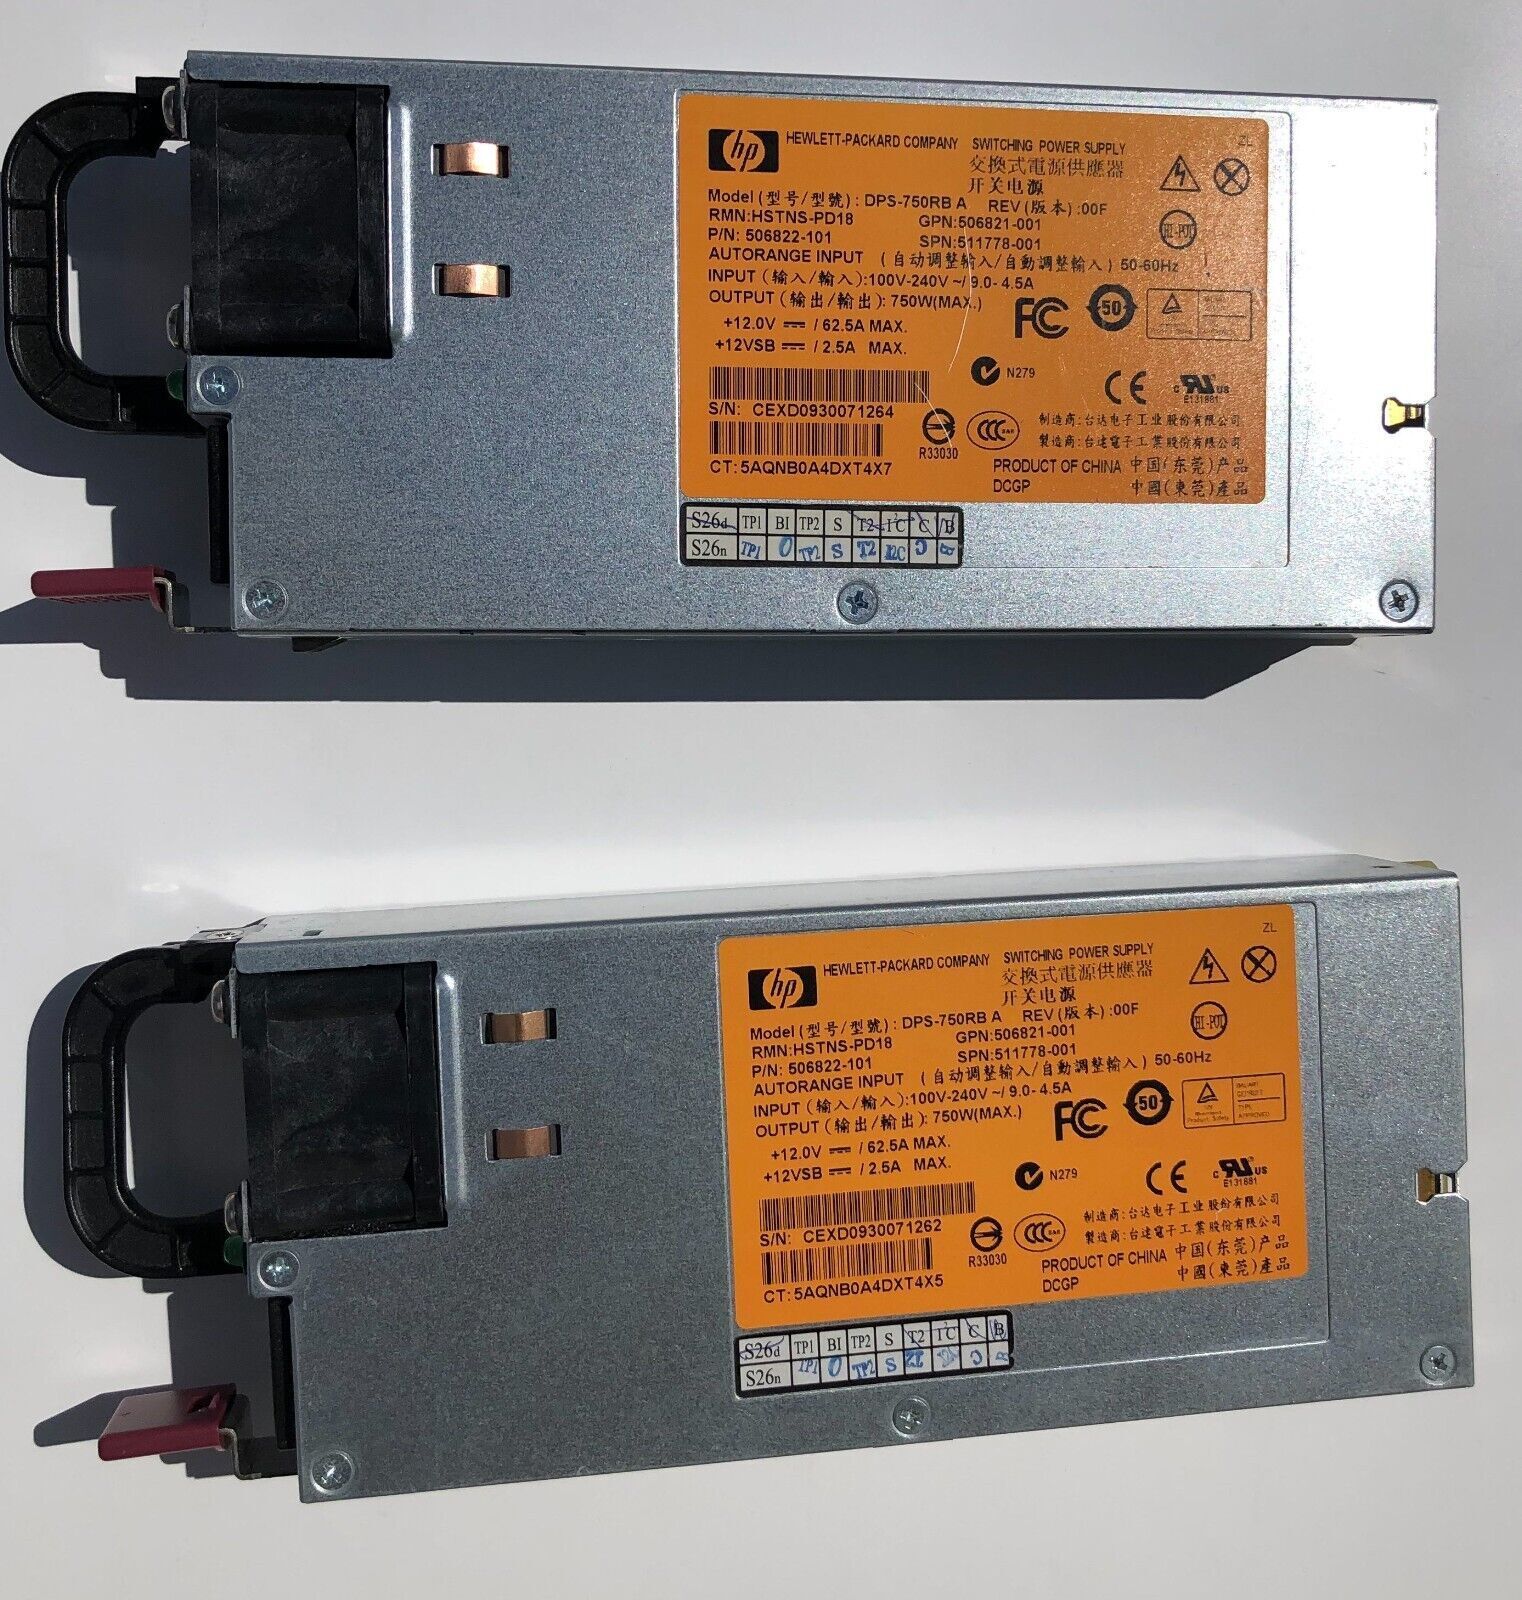 HP 750W Server Power Supply  HSTNS-PD18 506821-001 DPS-750RBA Lot of 2